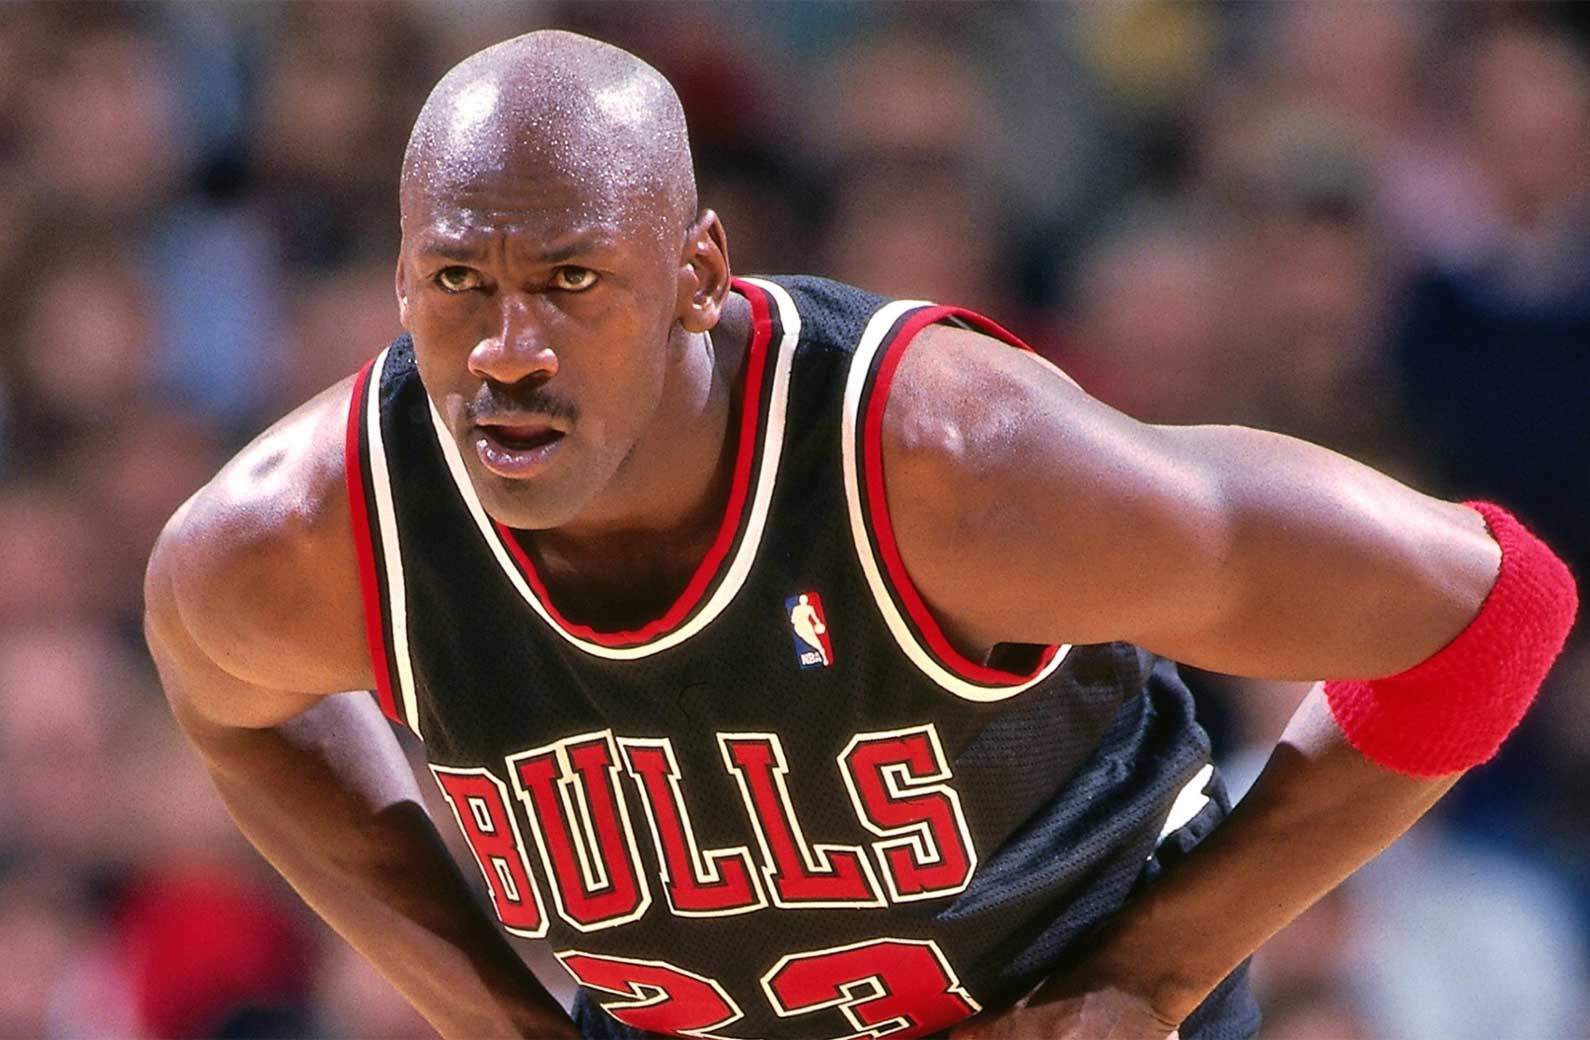 LeBron, not Michael Jordan, is NBA's greatest ever, Bill Laimbeer says